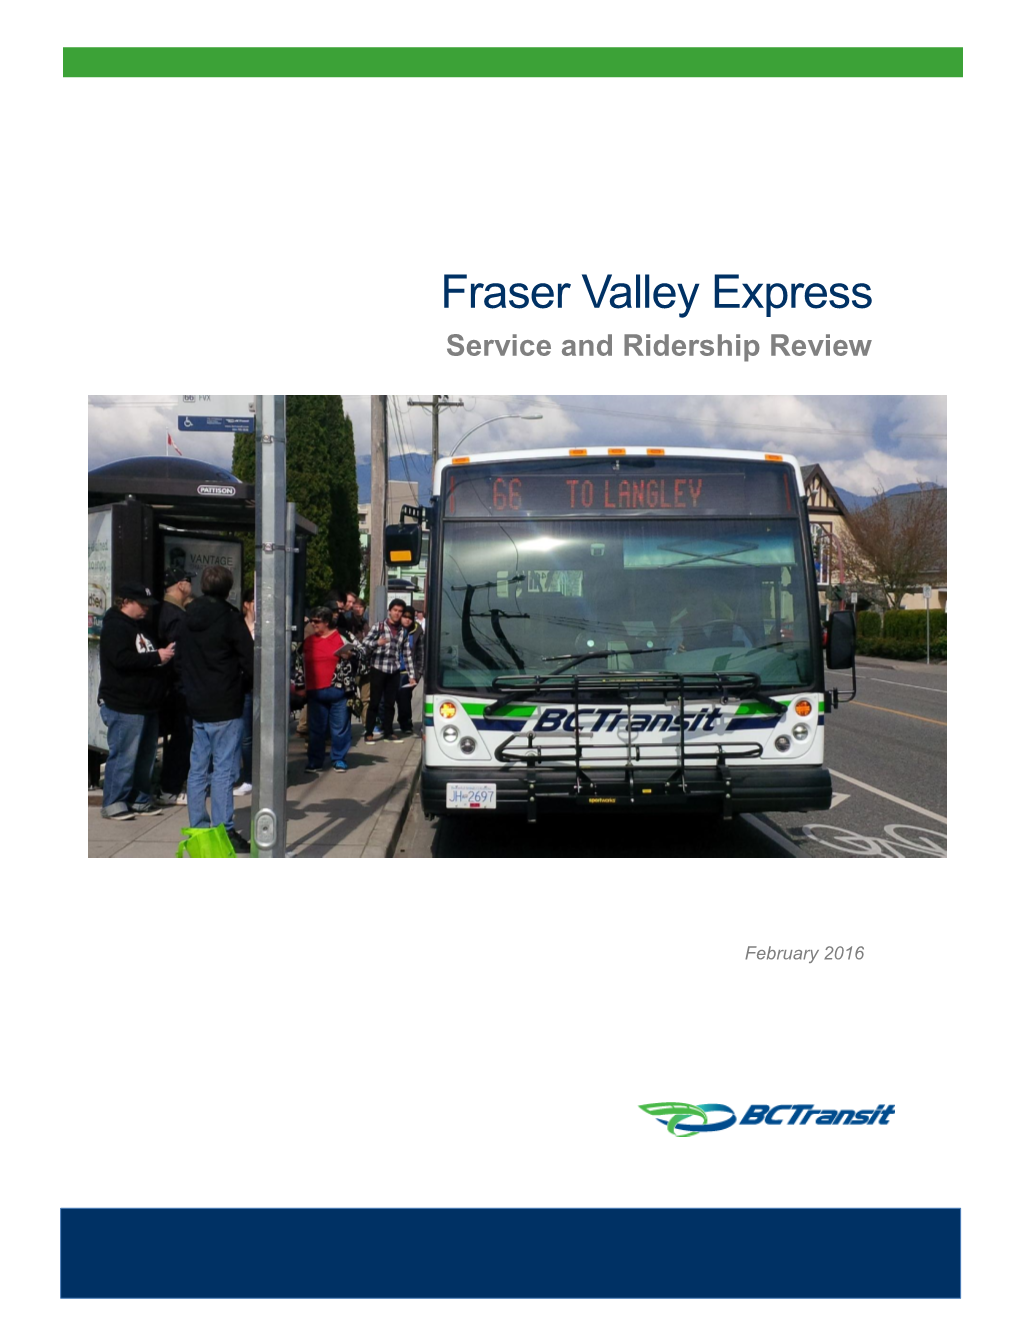 Fraser Valley Express Service and Ridership Review